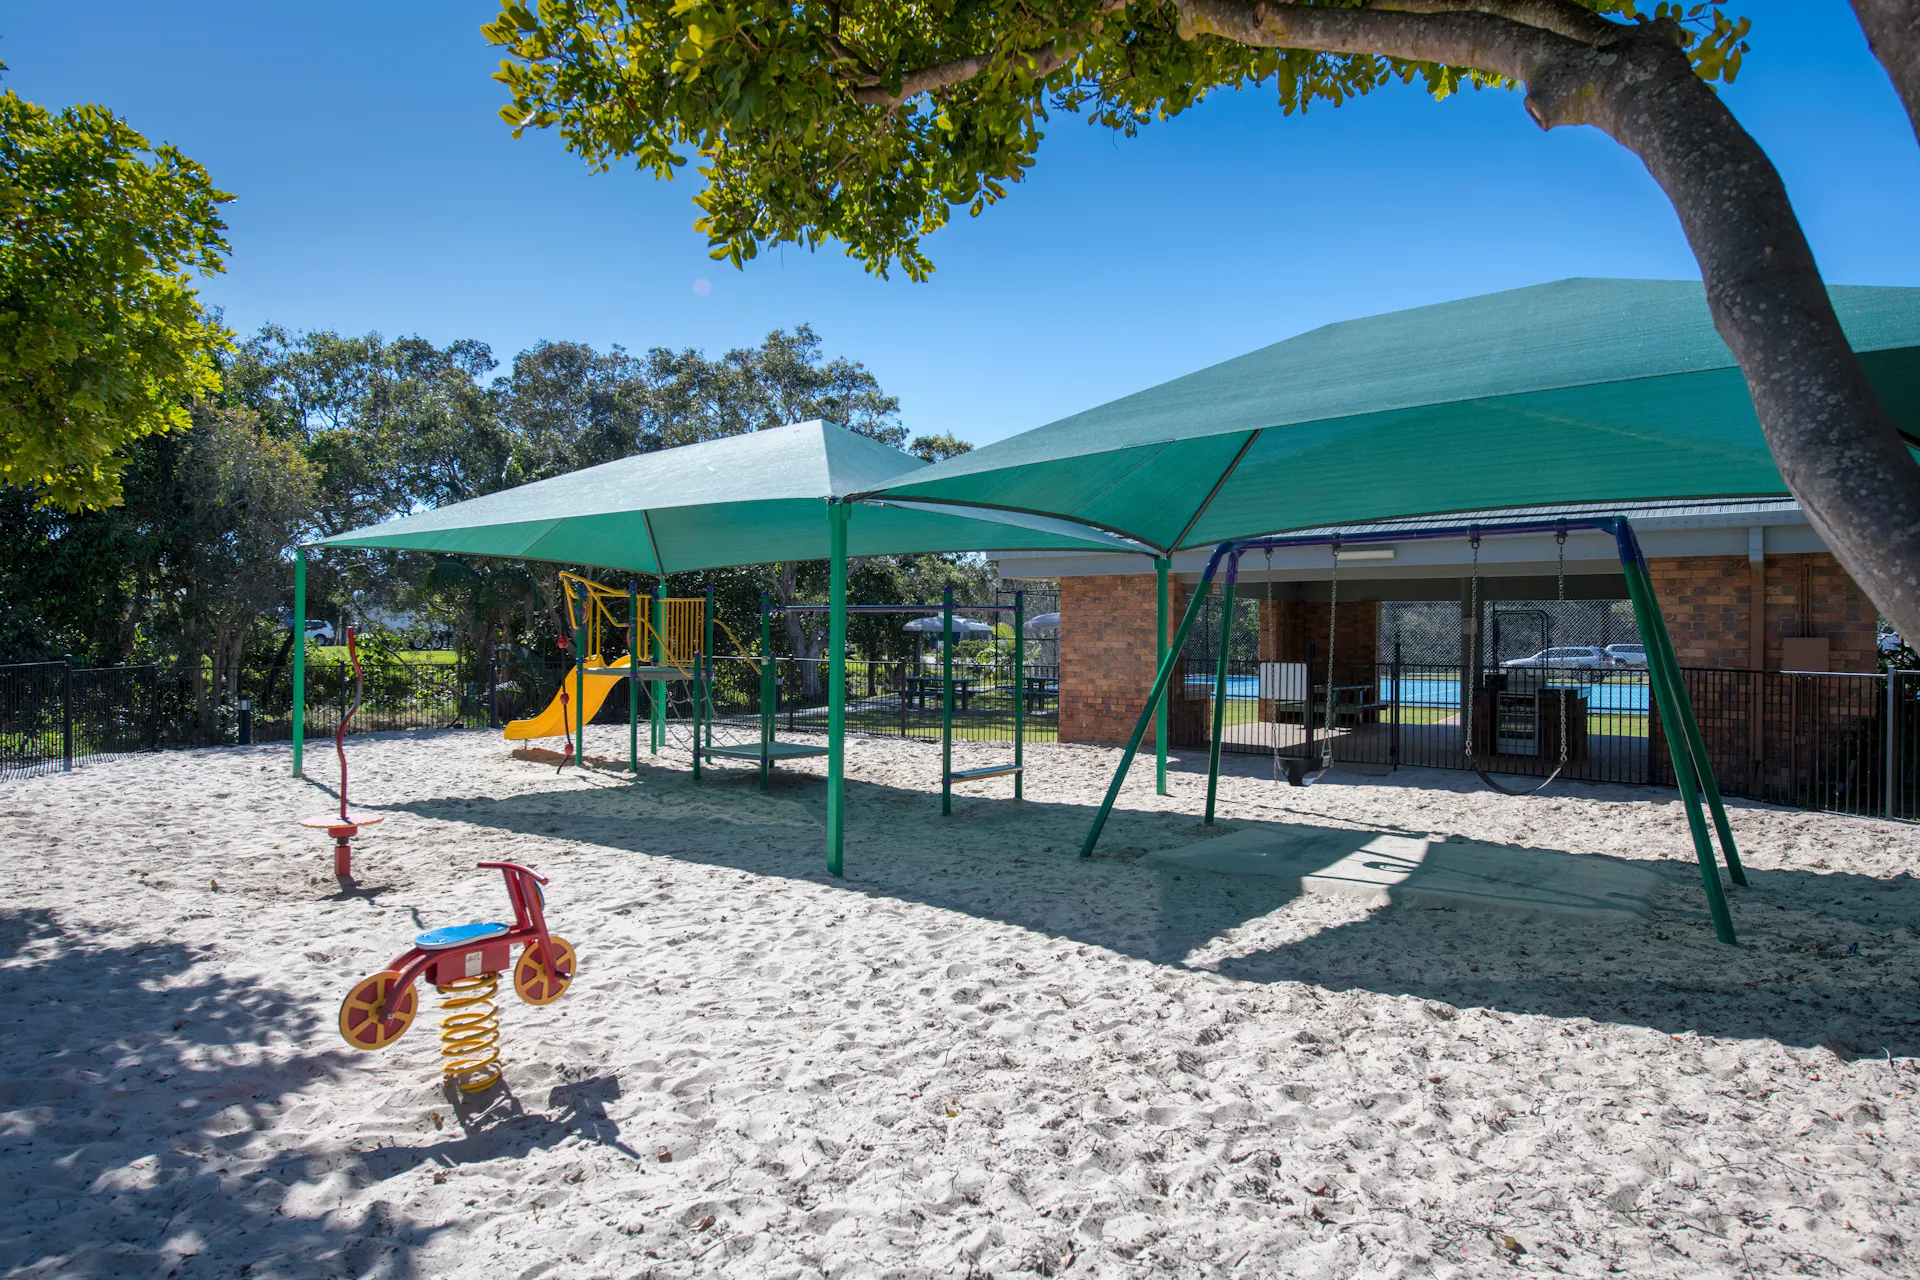 Dicky Beach Holiday Park playground on sand with shade covers and tennis court in background